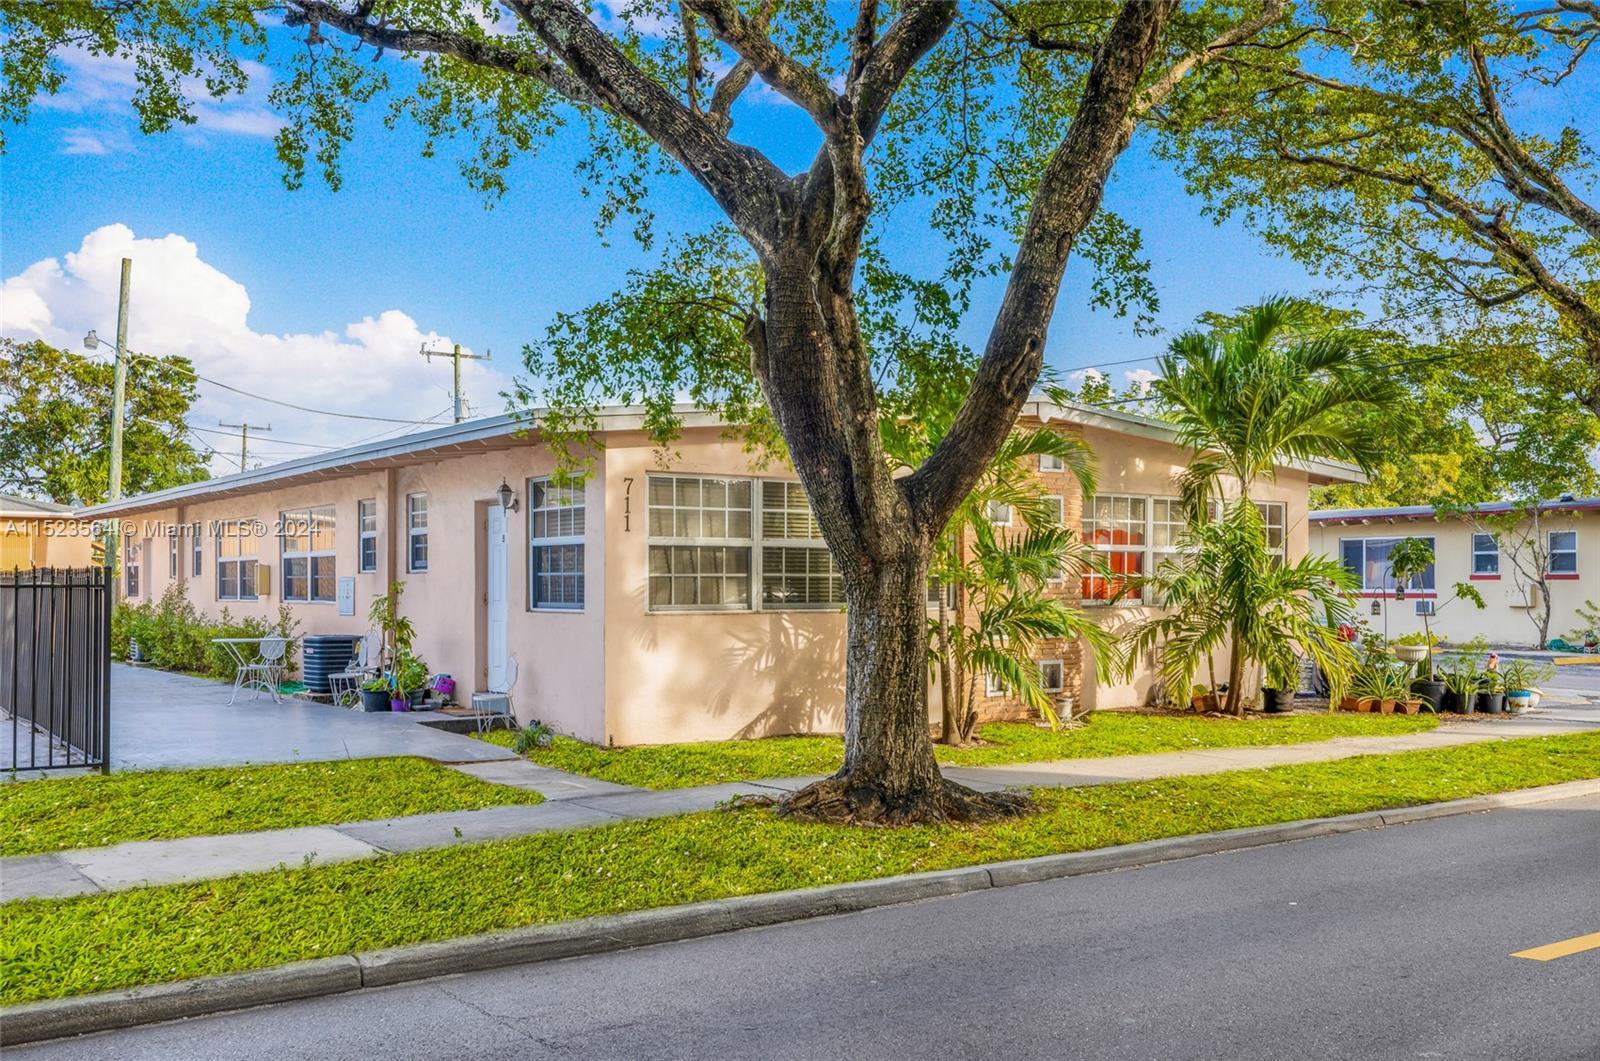 Photo of 711 S 20th Ave in Hollywood, FL